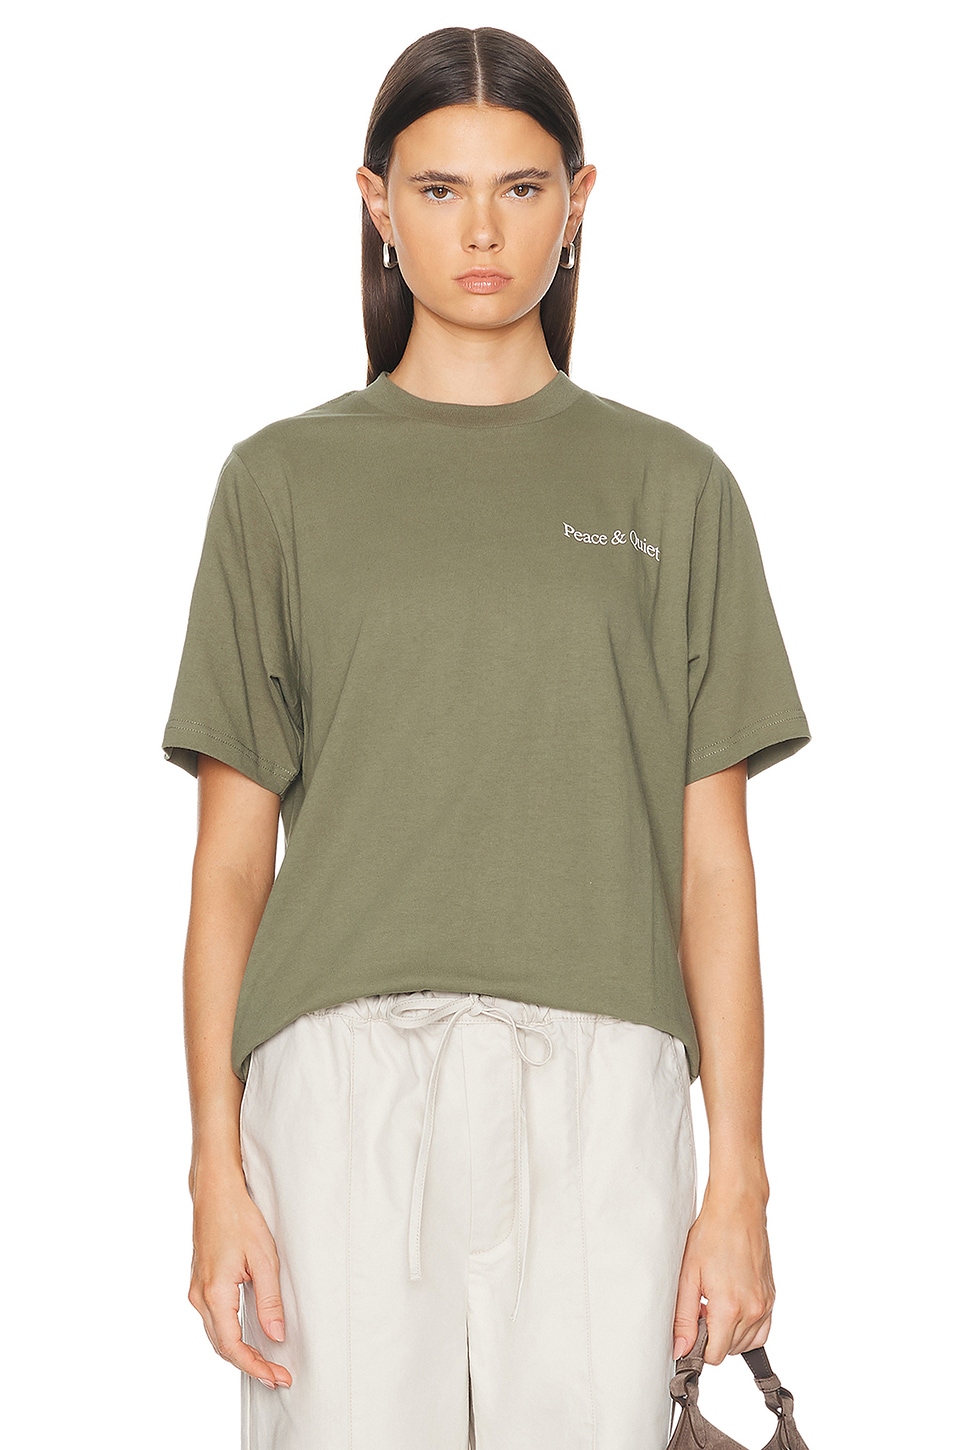 Image 1 of Museum of Peace and Quiet Wordmark T-Shirt in Olive